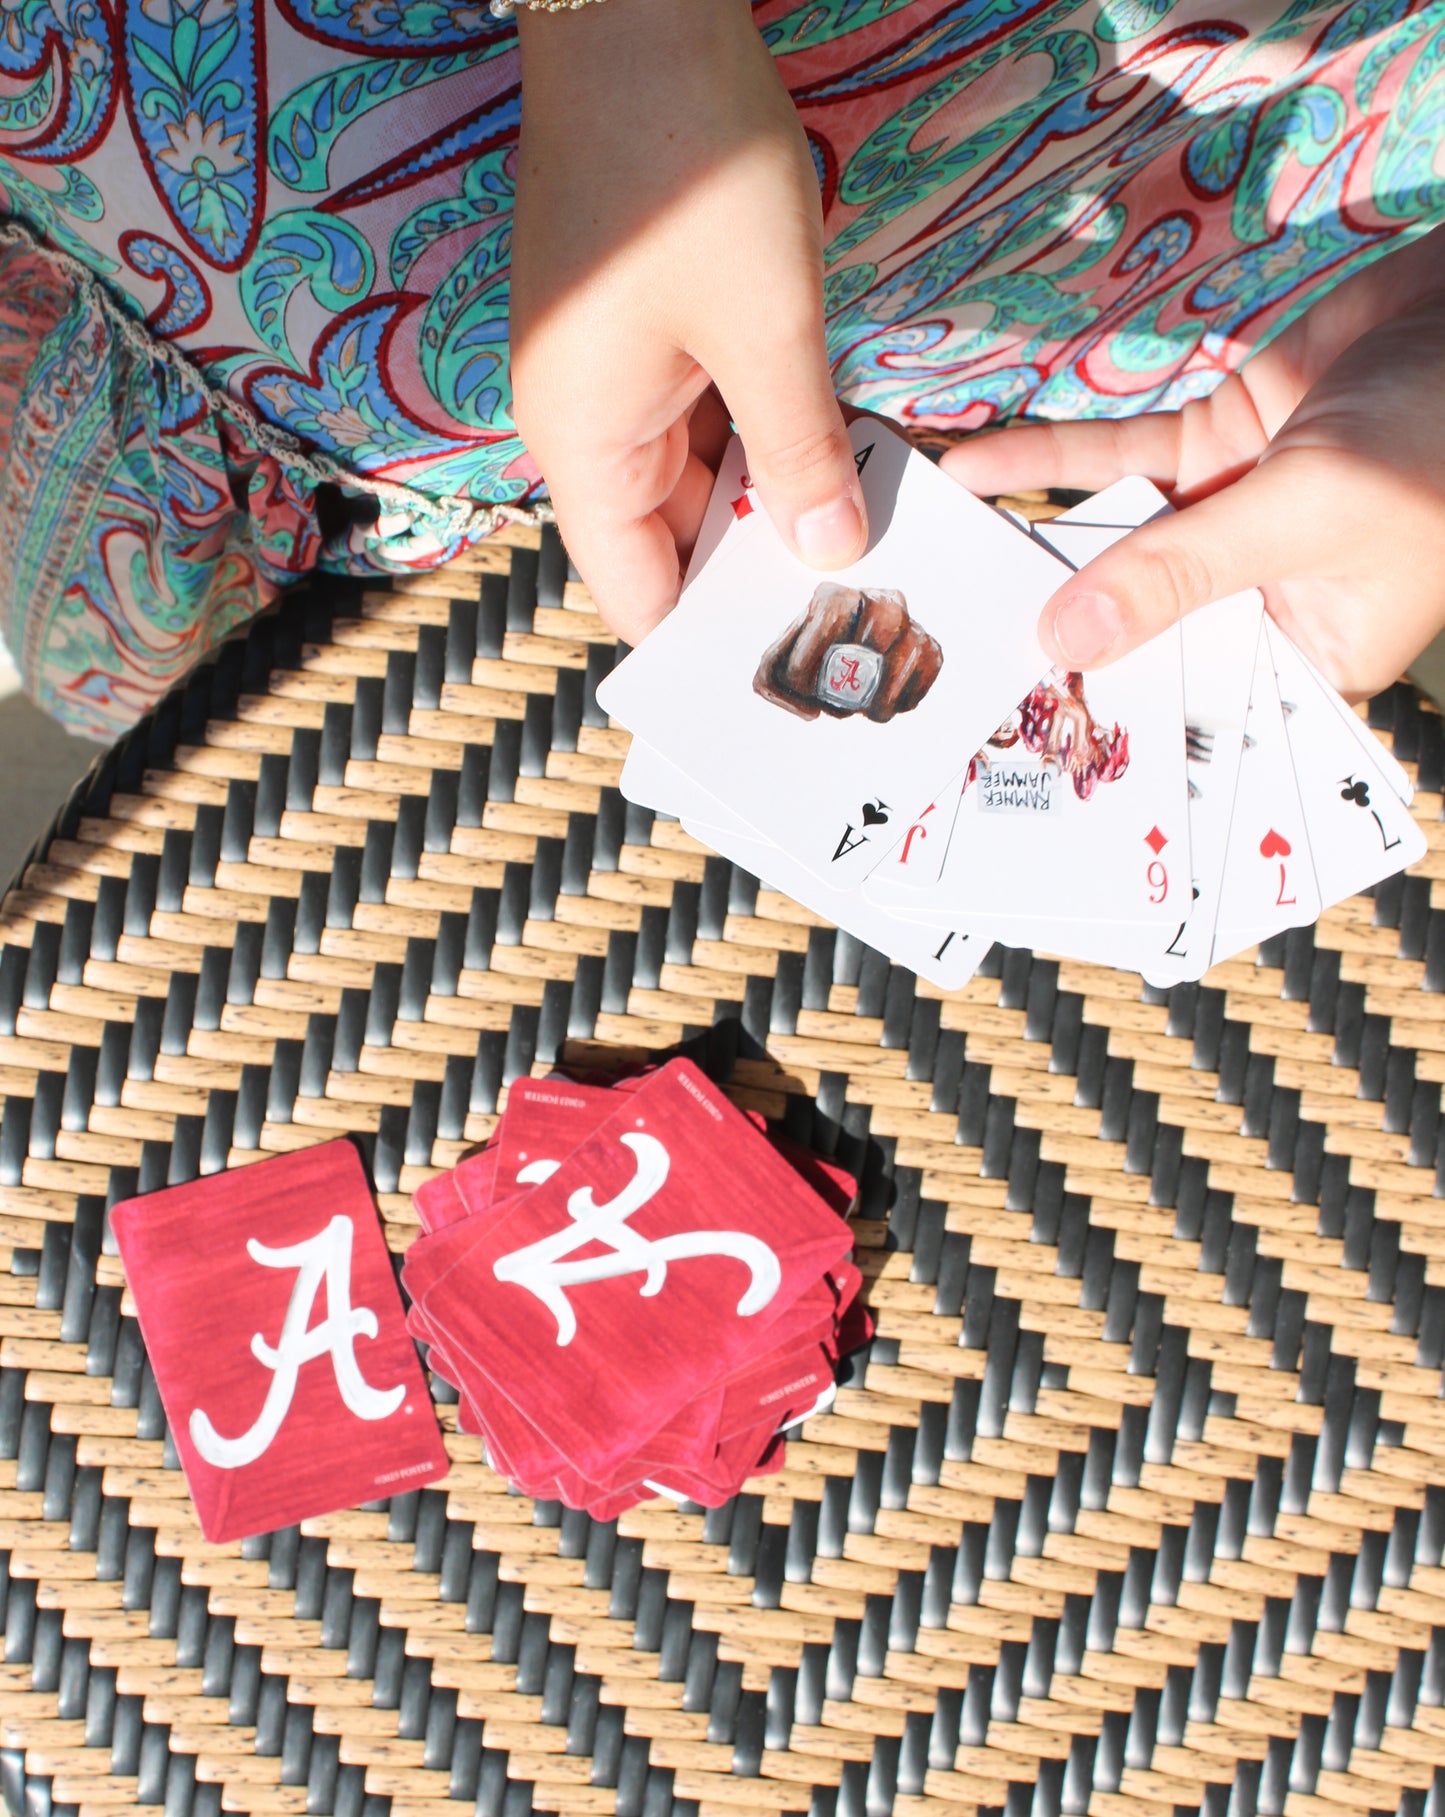 Alabama poker size playing cards perfect for game nights and graduation gifts